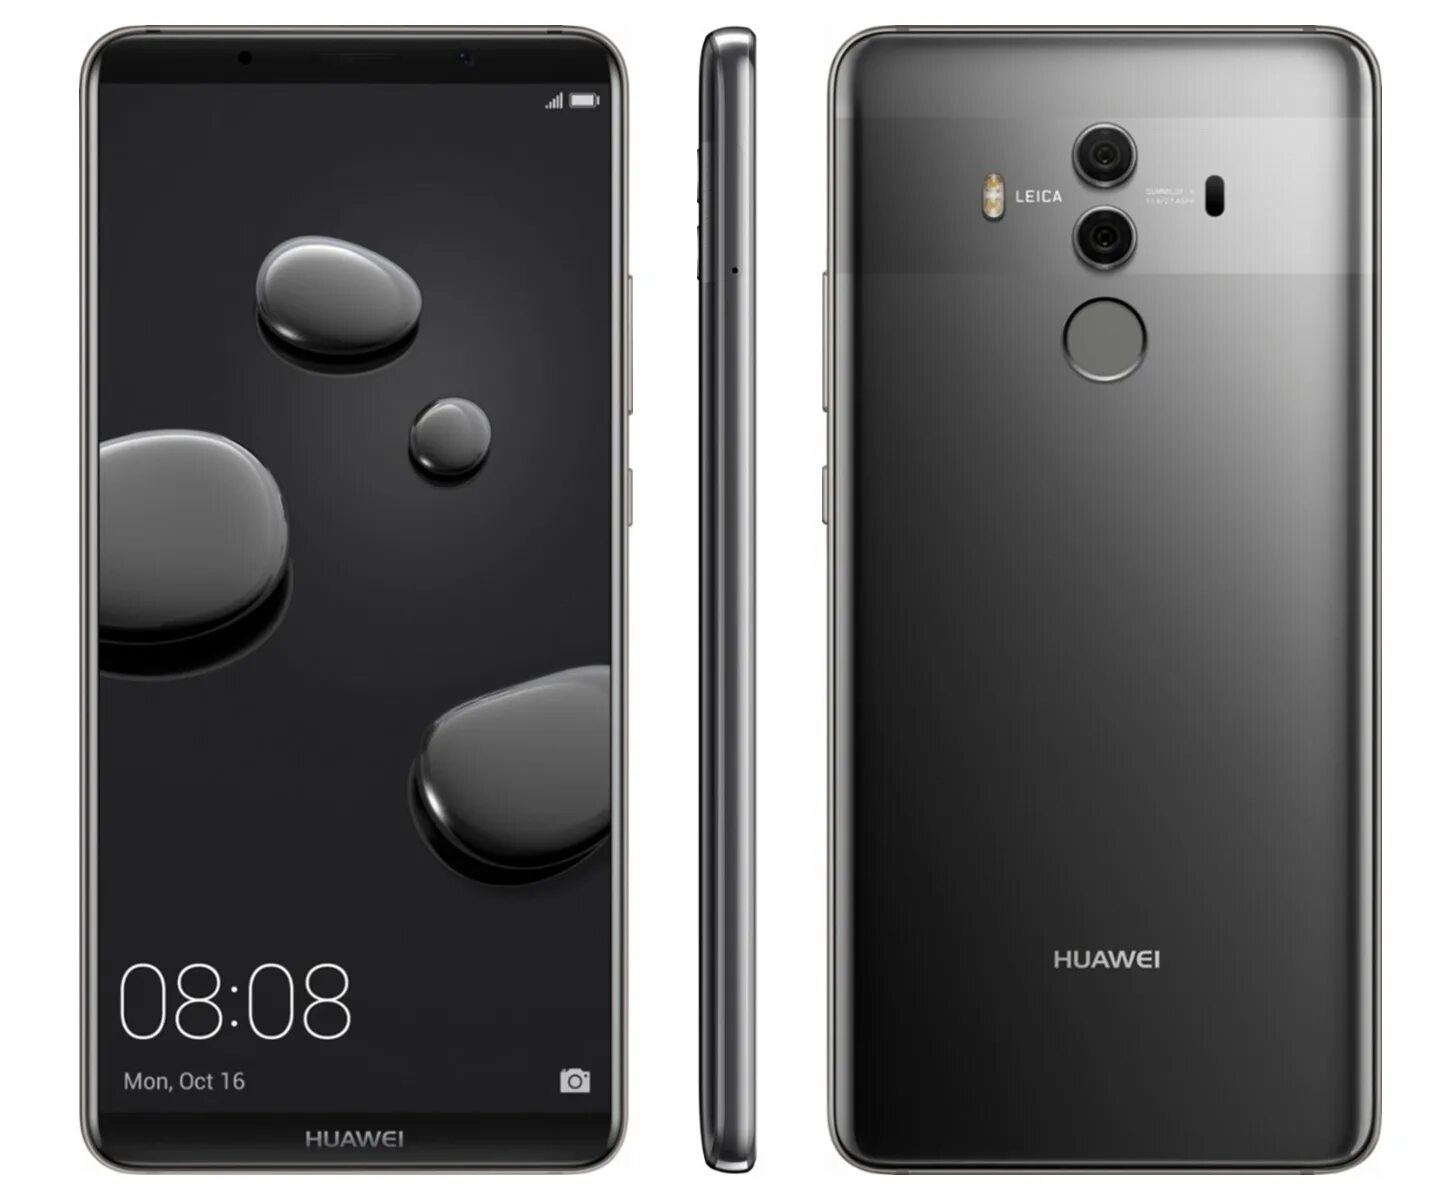 Huawei Mate 10 Pro. Хуавей y10 Pro. For Mate 10 Huawei. Huawei 10 Pro narxi. Хуавей mate купить